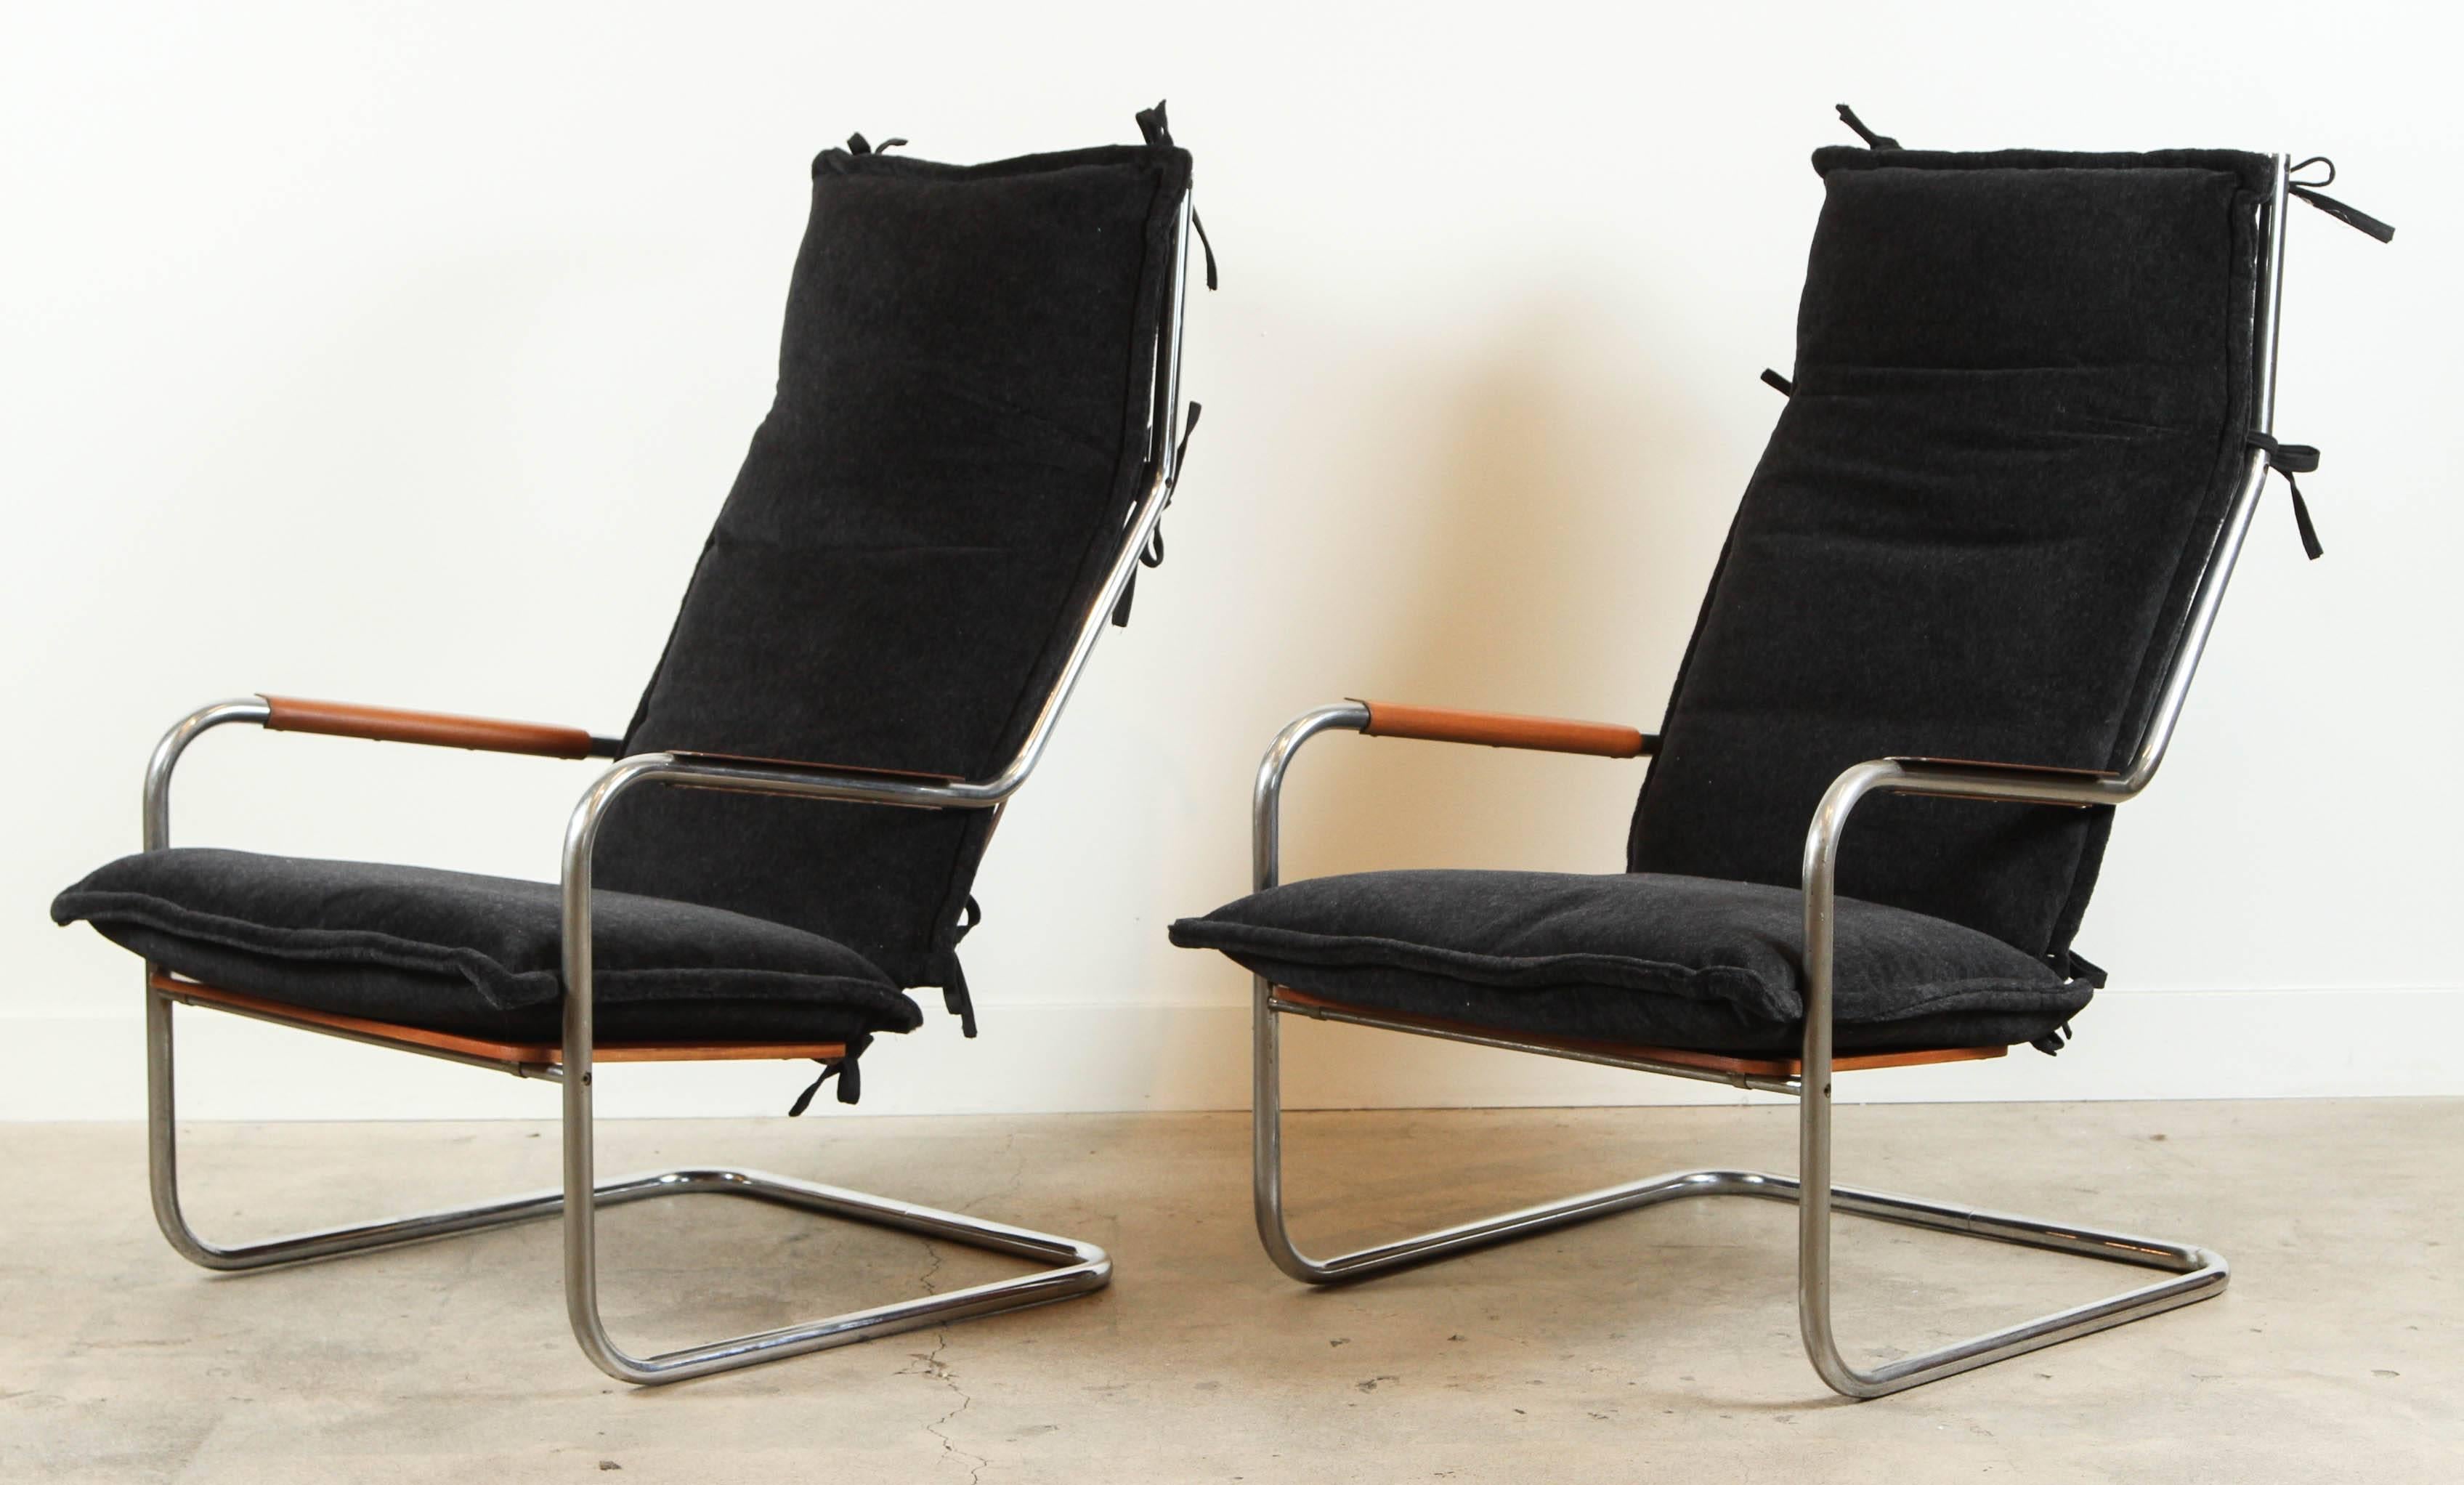 Pair of alpaca and chrome lounge chairs by Thonet.